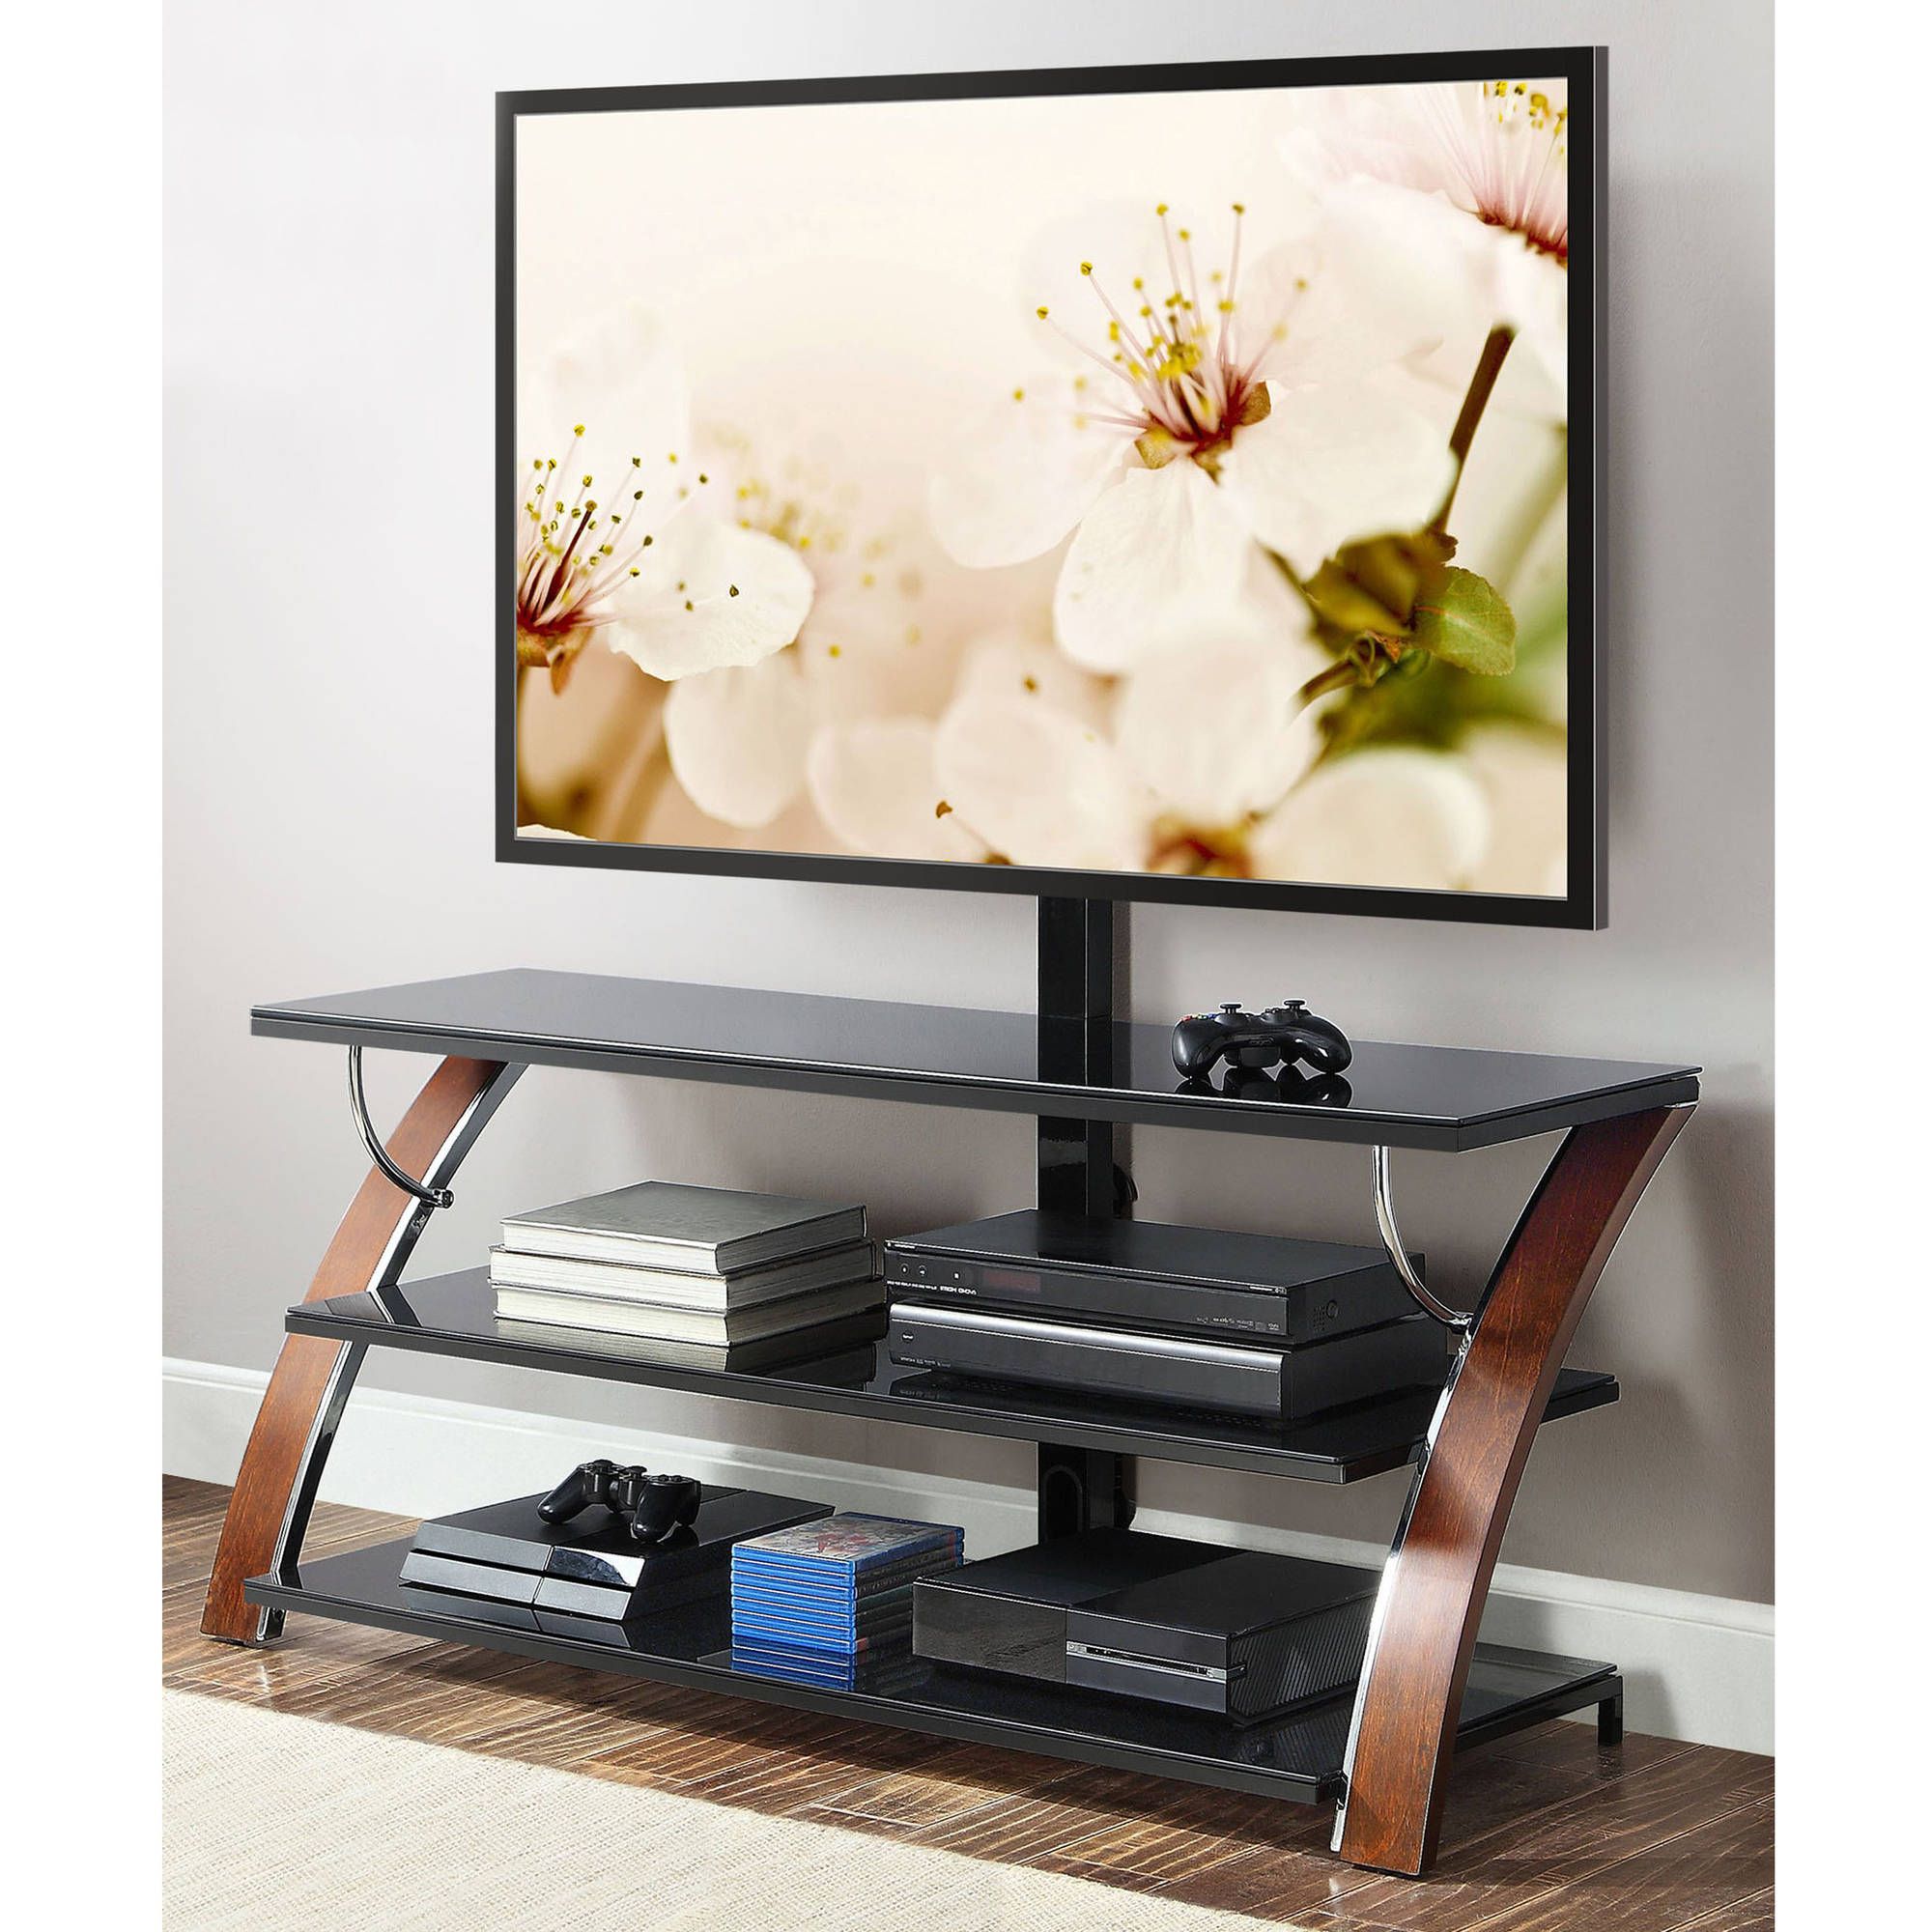 Whalen Payton Brown Cherry 3 In 1 Flat Panel Tv Stand For Tvs Up To Within Jaxon 71 Inch Tv Stands (View 11 of 30)